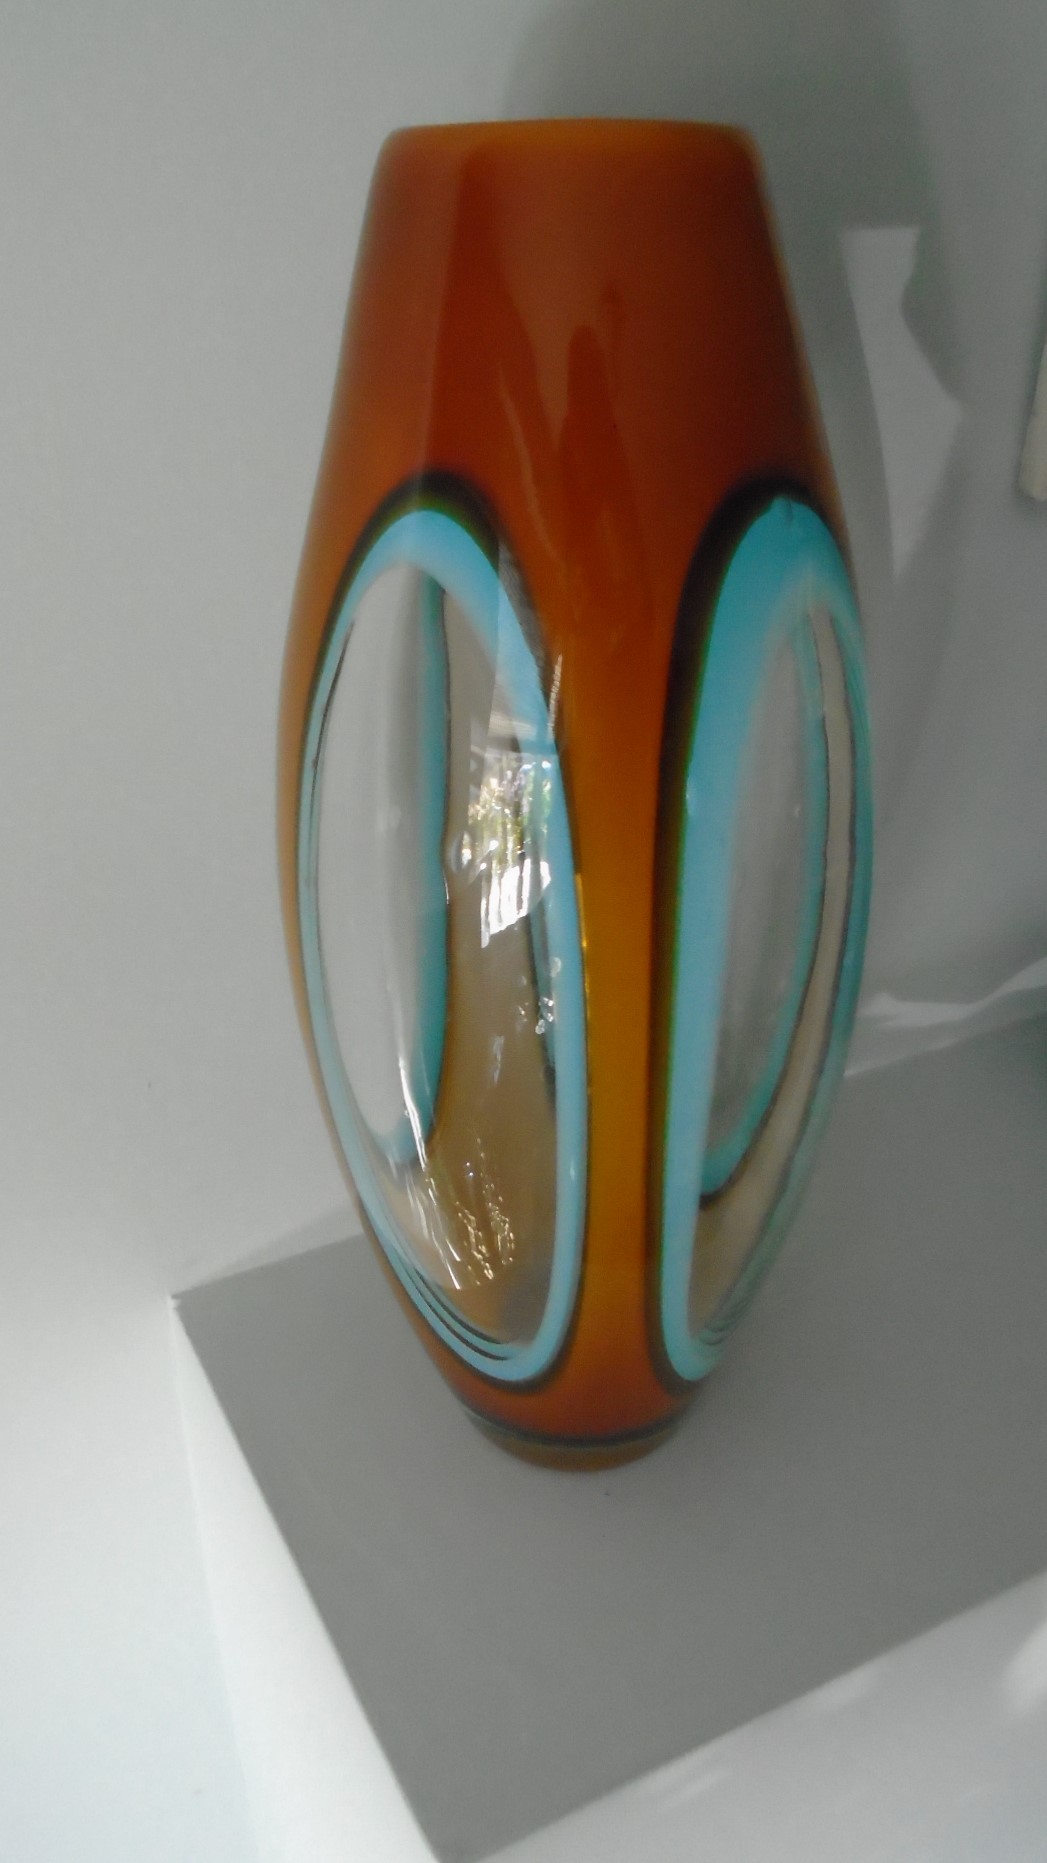 1970s Laguna Vicchia Murano Art Glass “Lens” Vase. It stands 34cms in height and is in good used condition free from chips and cracks.  Weighs upacked 1.4Kgs.